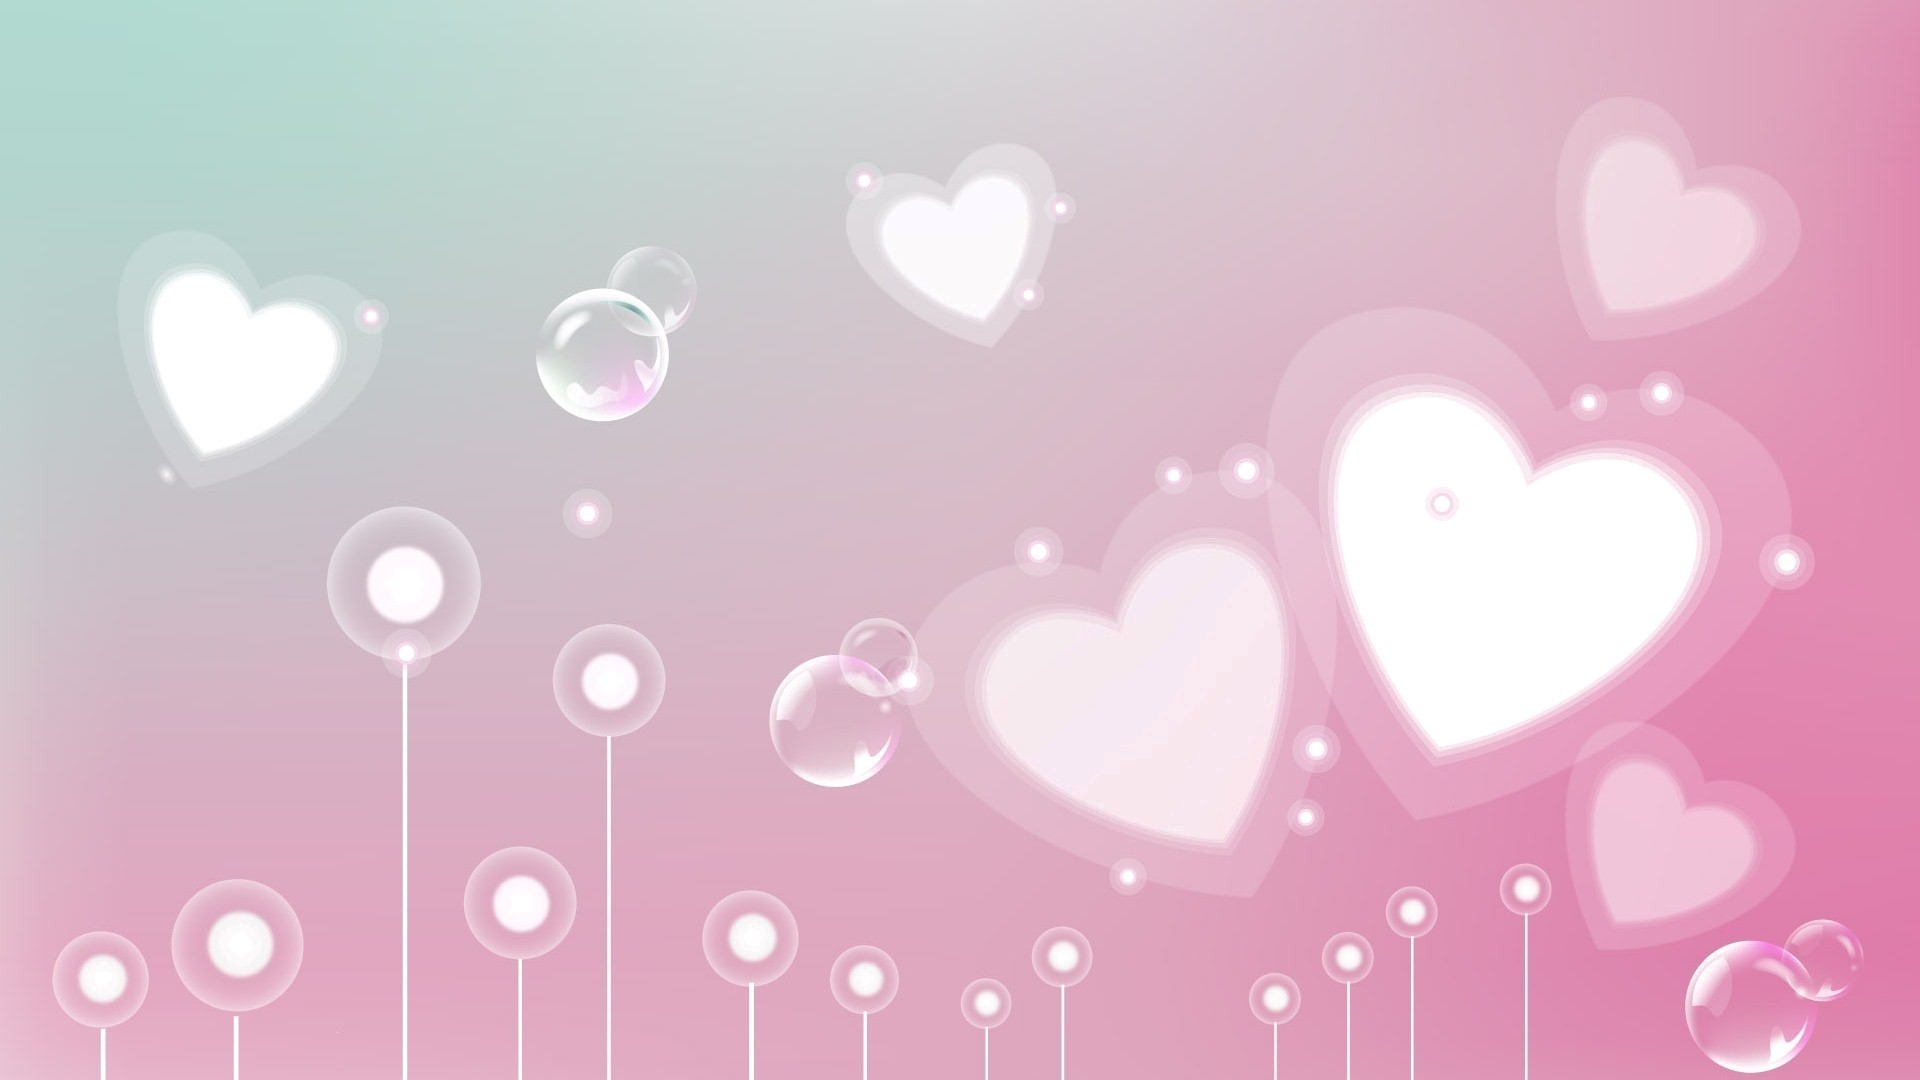 1920x1080 Download now full hd wallpaper heart pink romantic abstraction ...